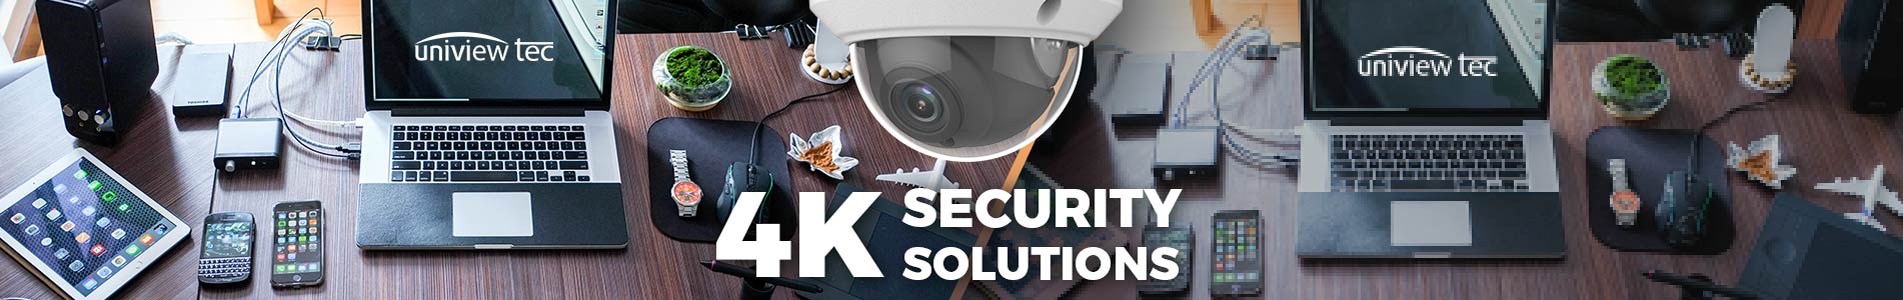 4K Security Solutions